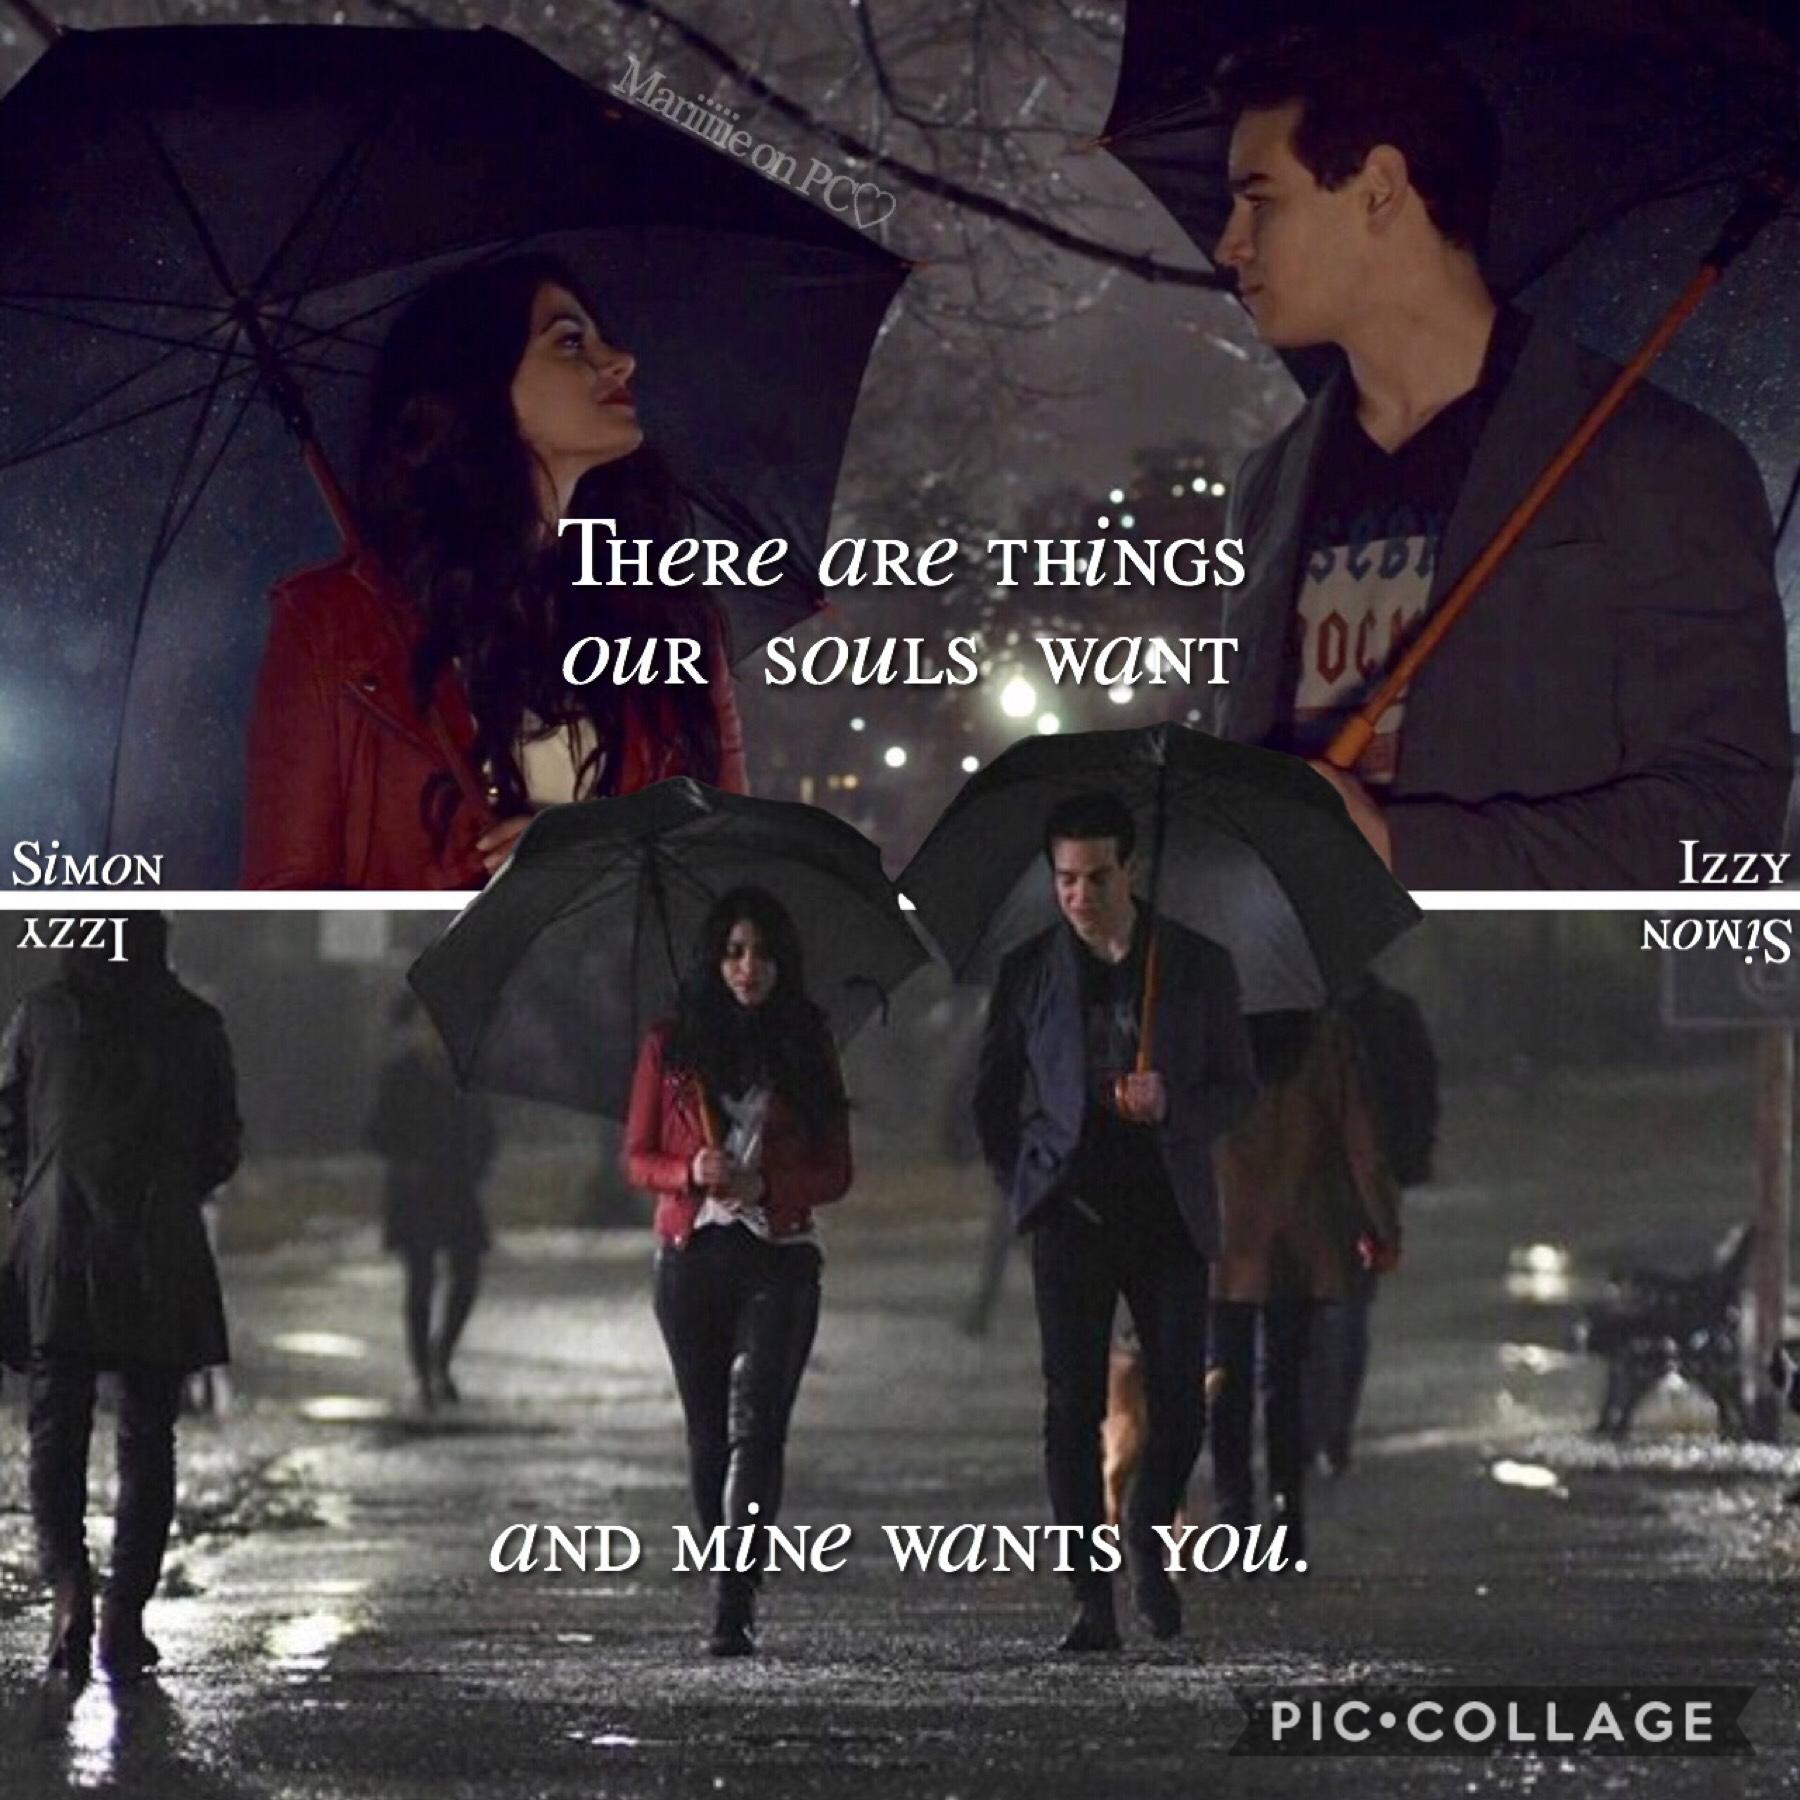 ➰- T A P -➰

This is a Sizzy collage I made a long time ago...
Tell me what you think about it!😊

Also I will not be as active as I am currently bc I’m going on vacation and I would be harder to edit...😕

QOTD - Climon or Sizzy?

AOTD - Sizzy of course❤️
